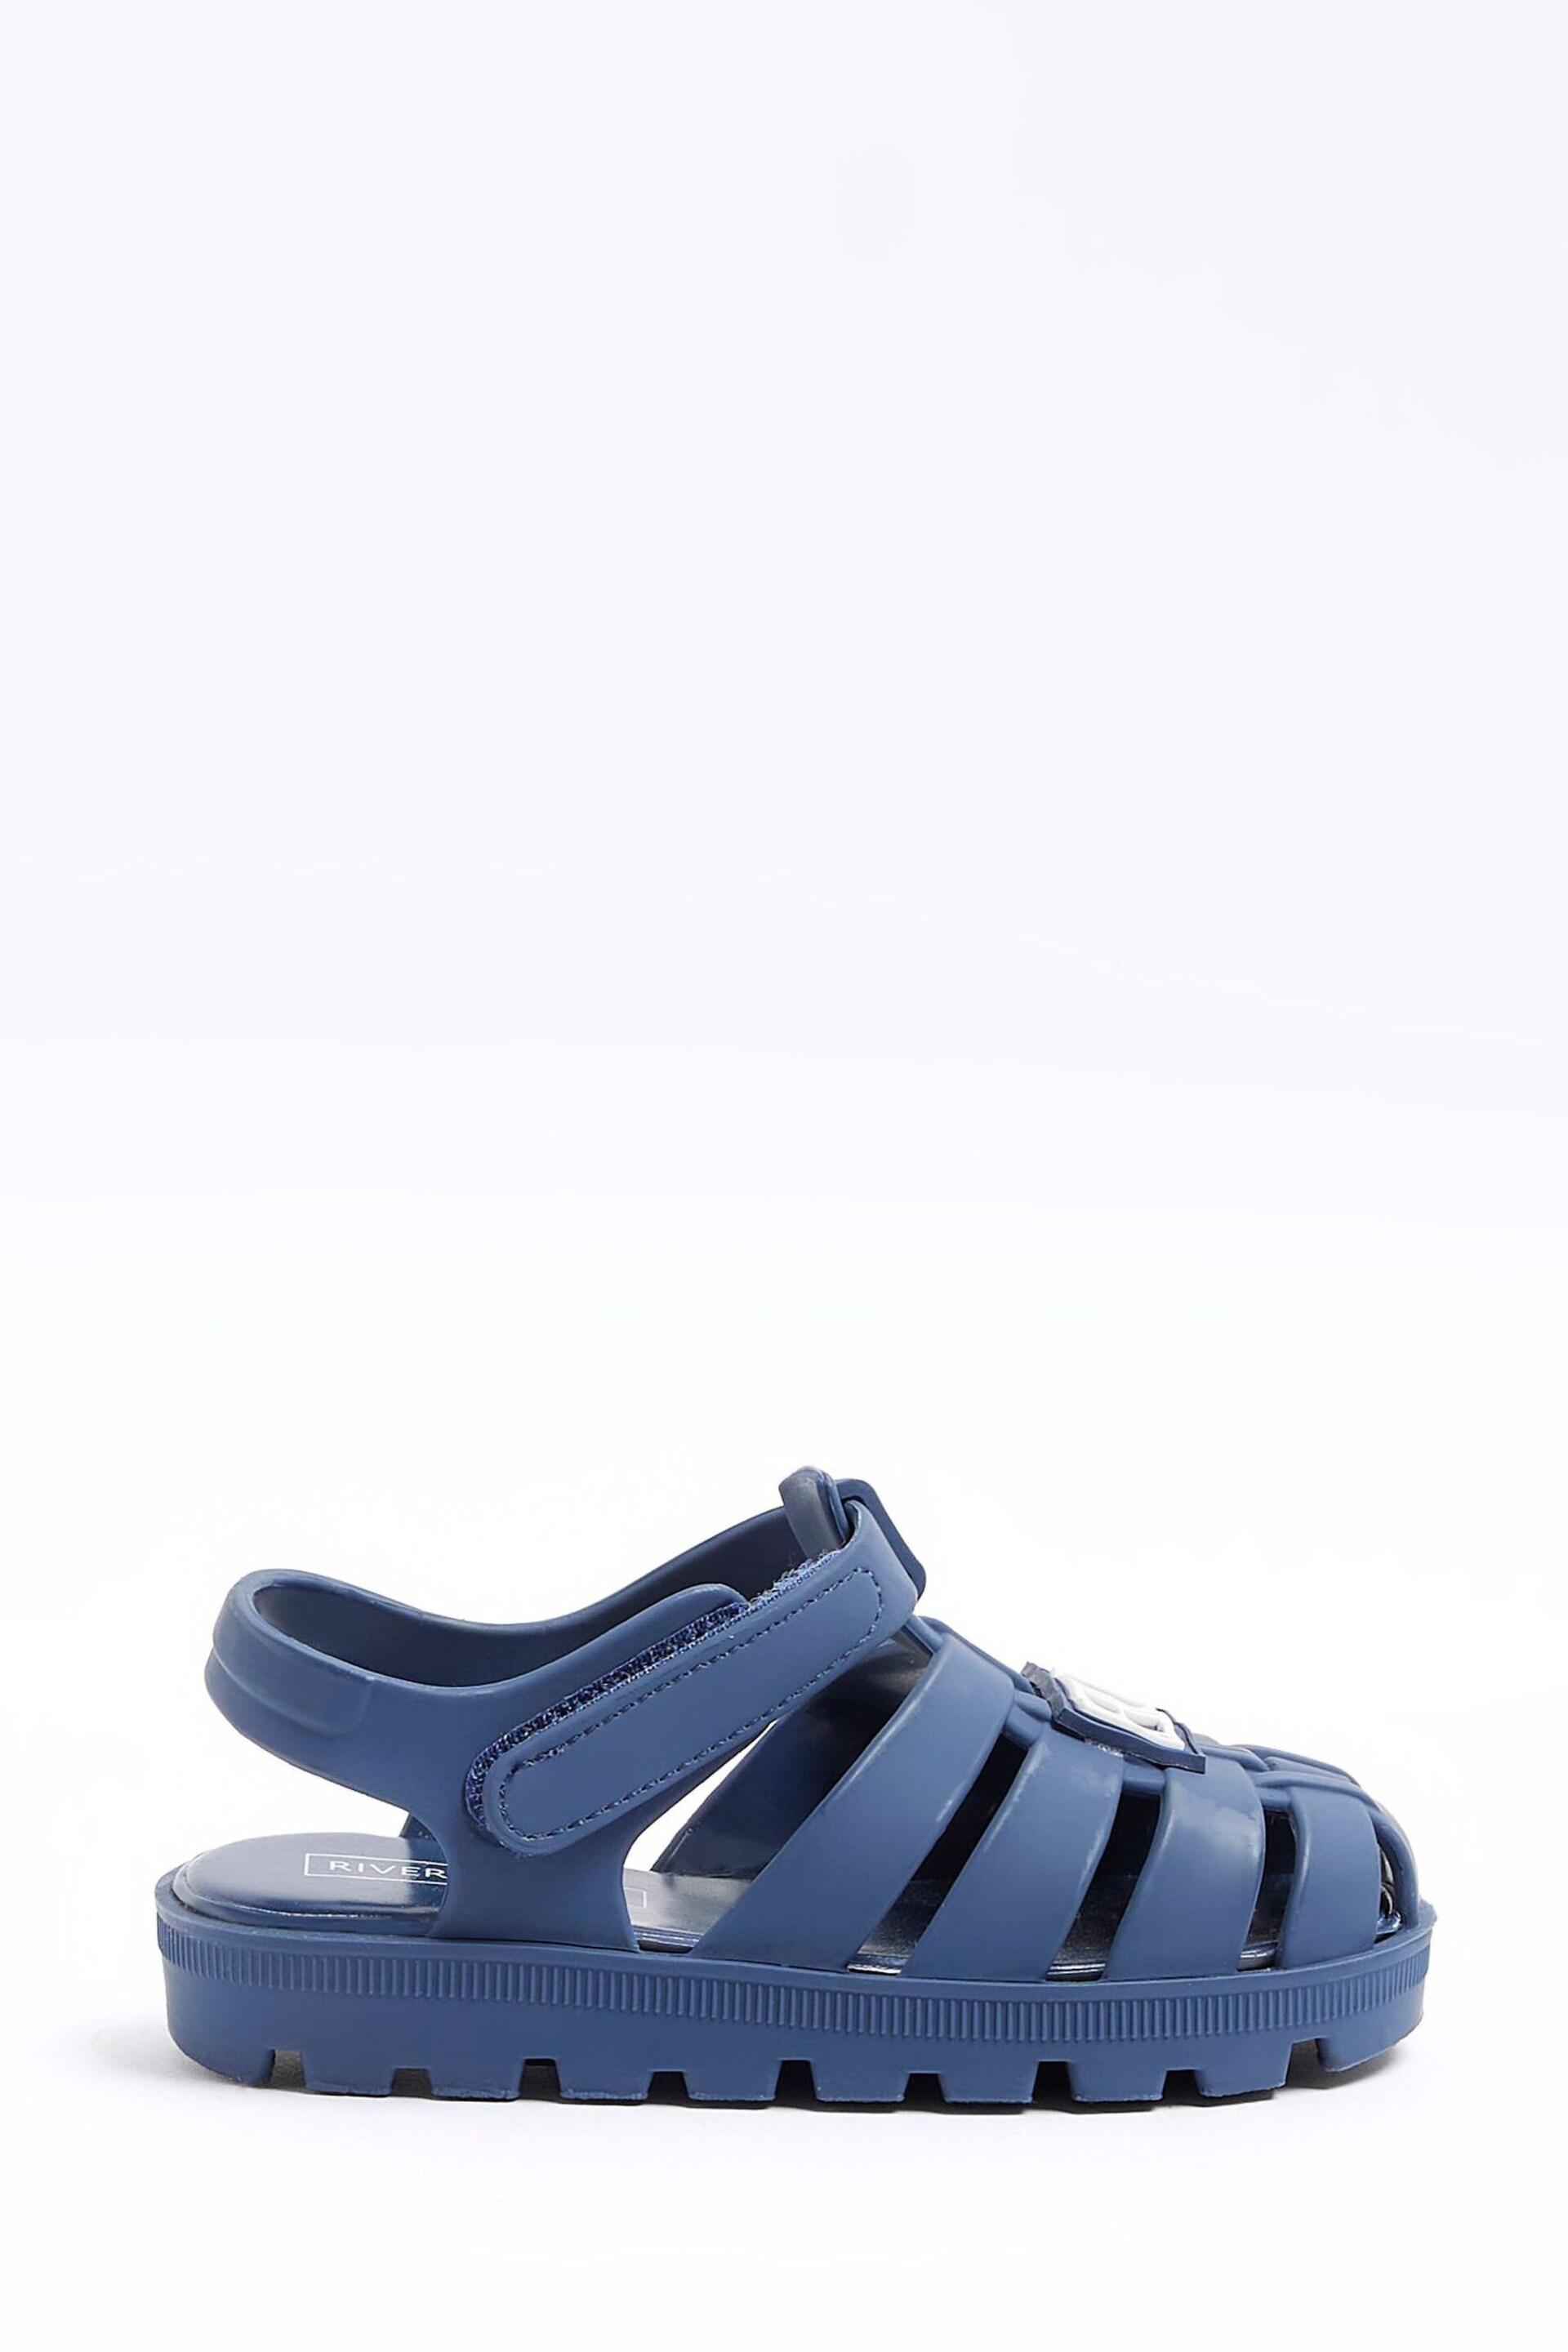 River Island Blue Boys Rubber Jelly Sandals - Image 1 of 4